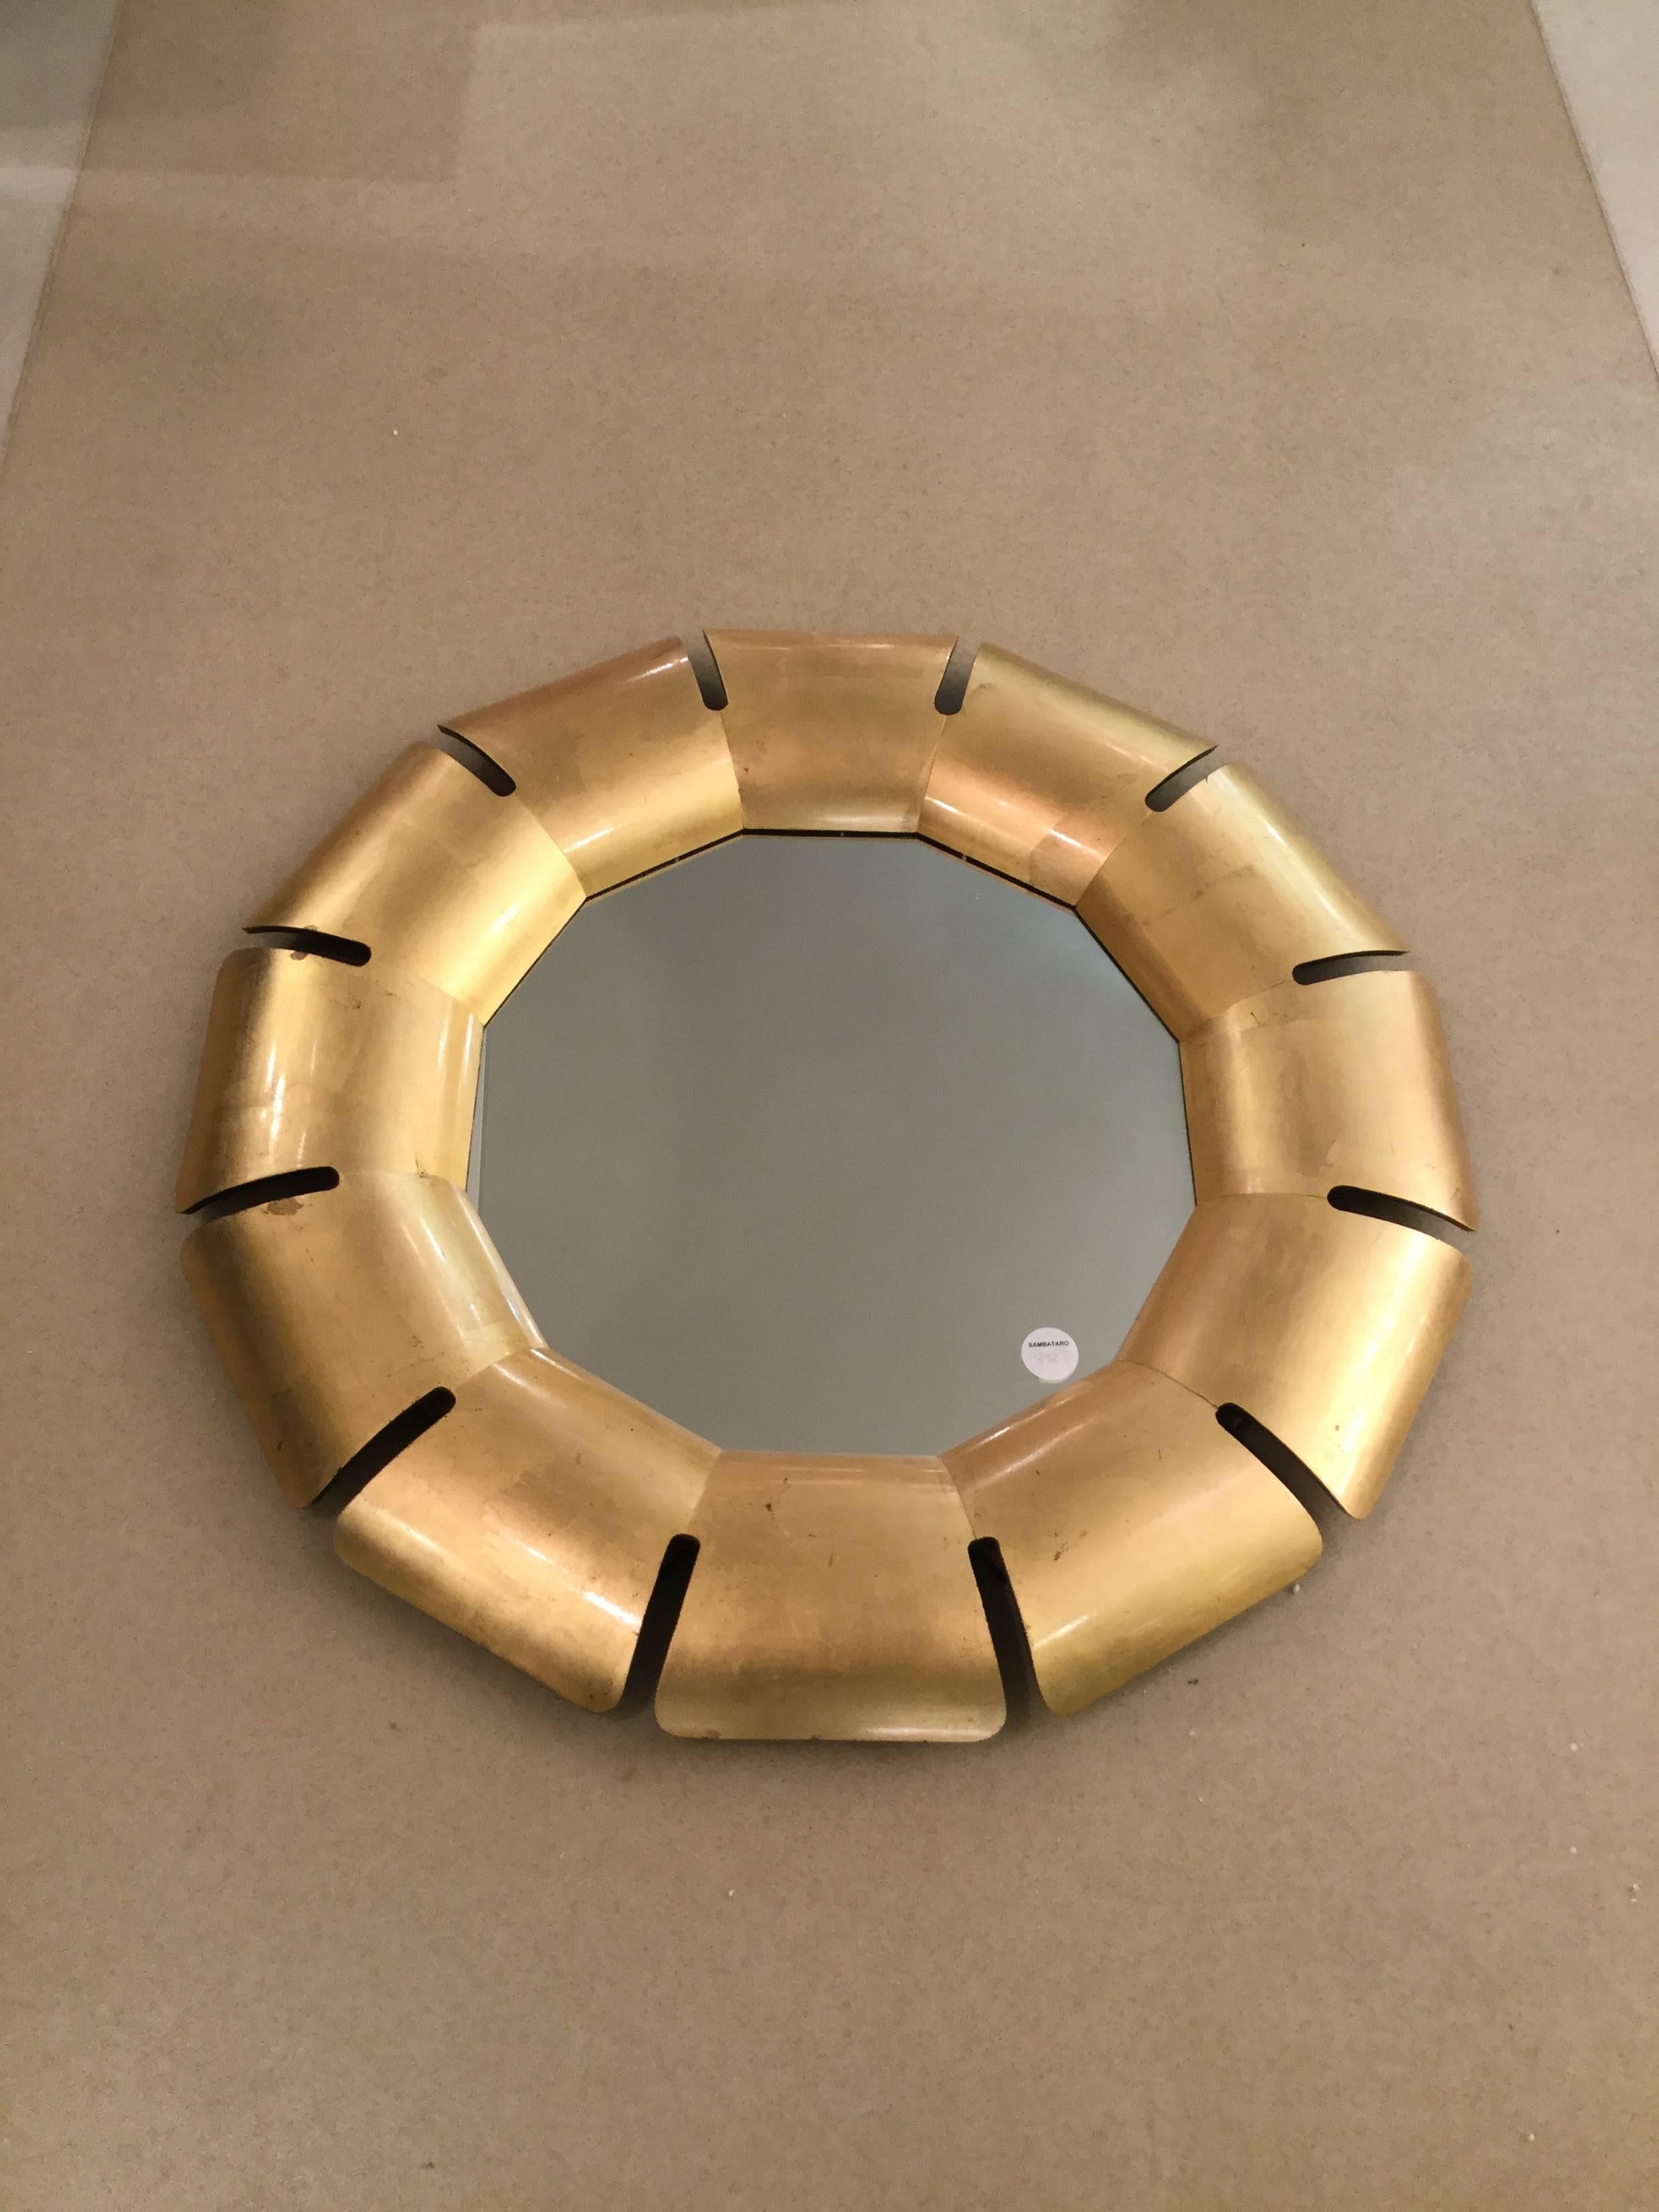 A beautiful Italian mirror made of gilded bentwood.